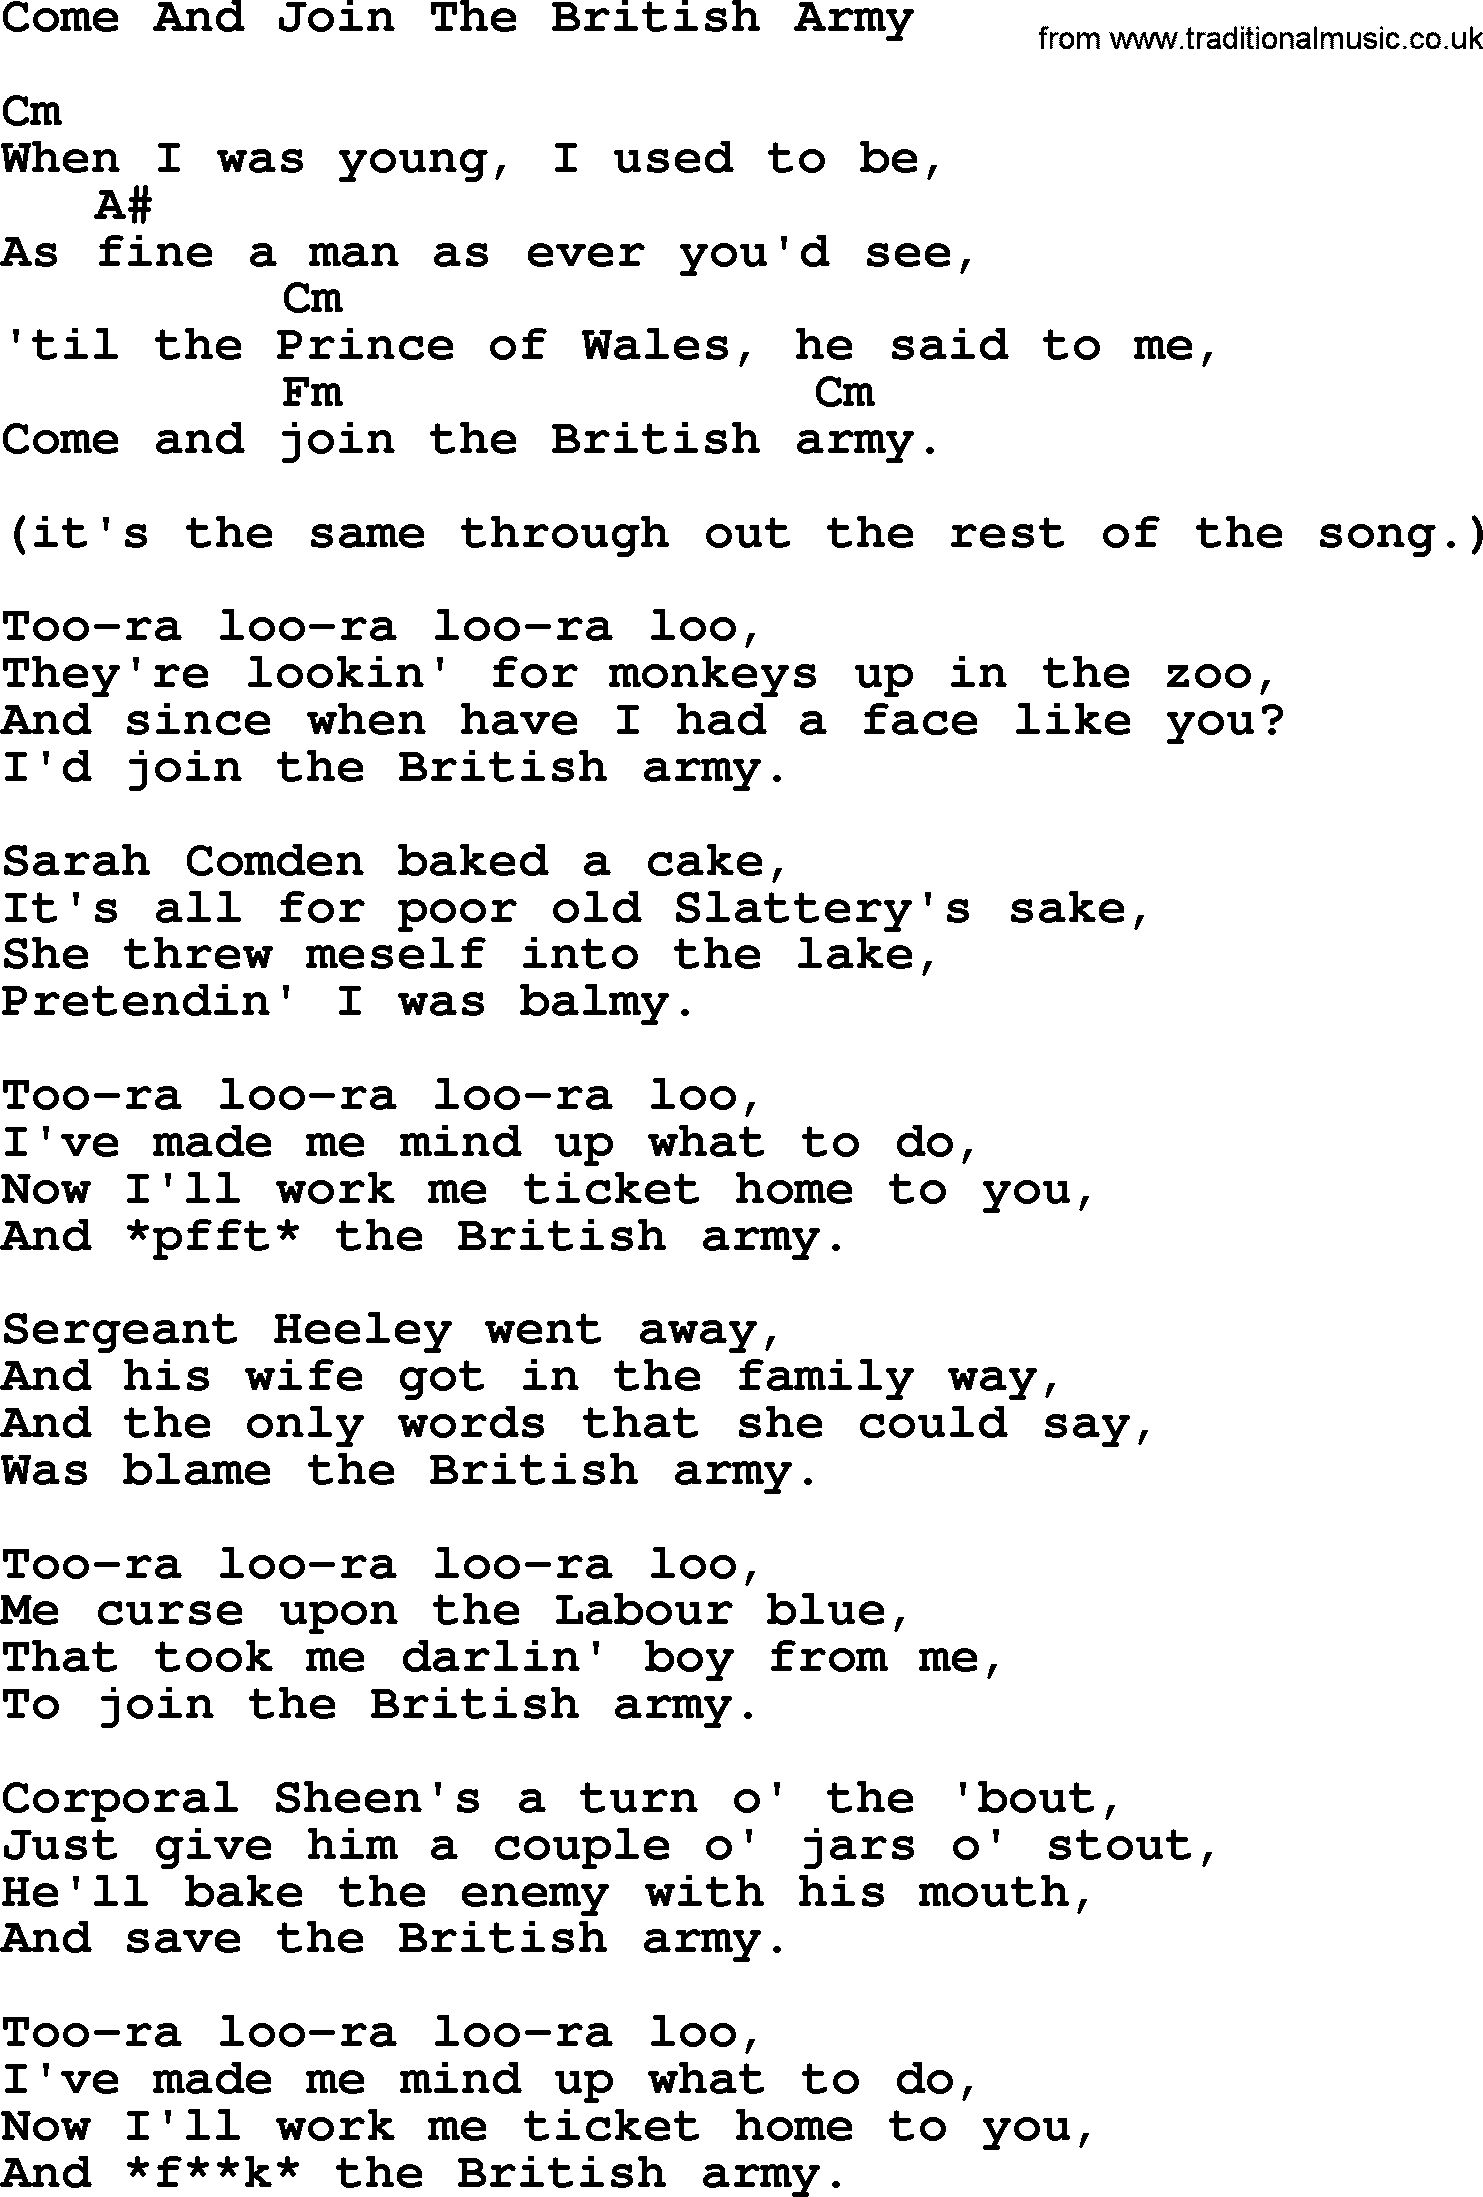 The Dubliners song: Come And Join The British Army, lyrics and chords